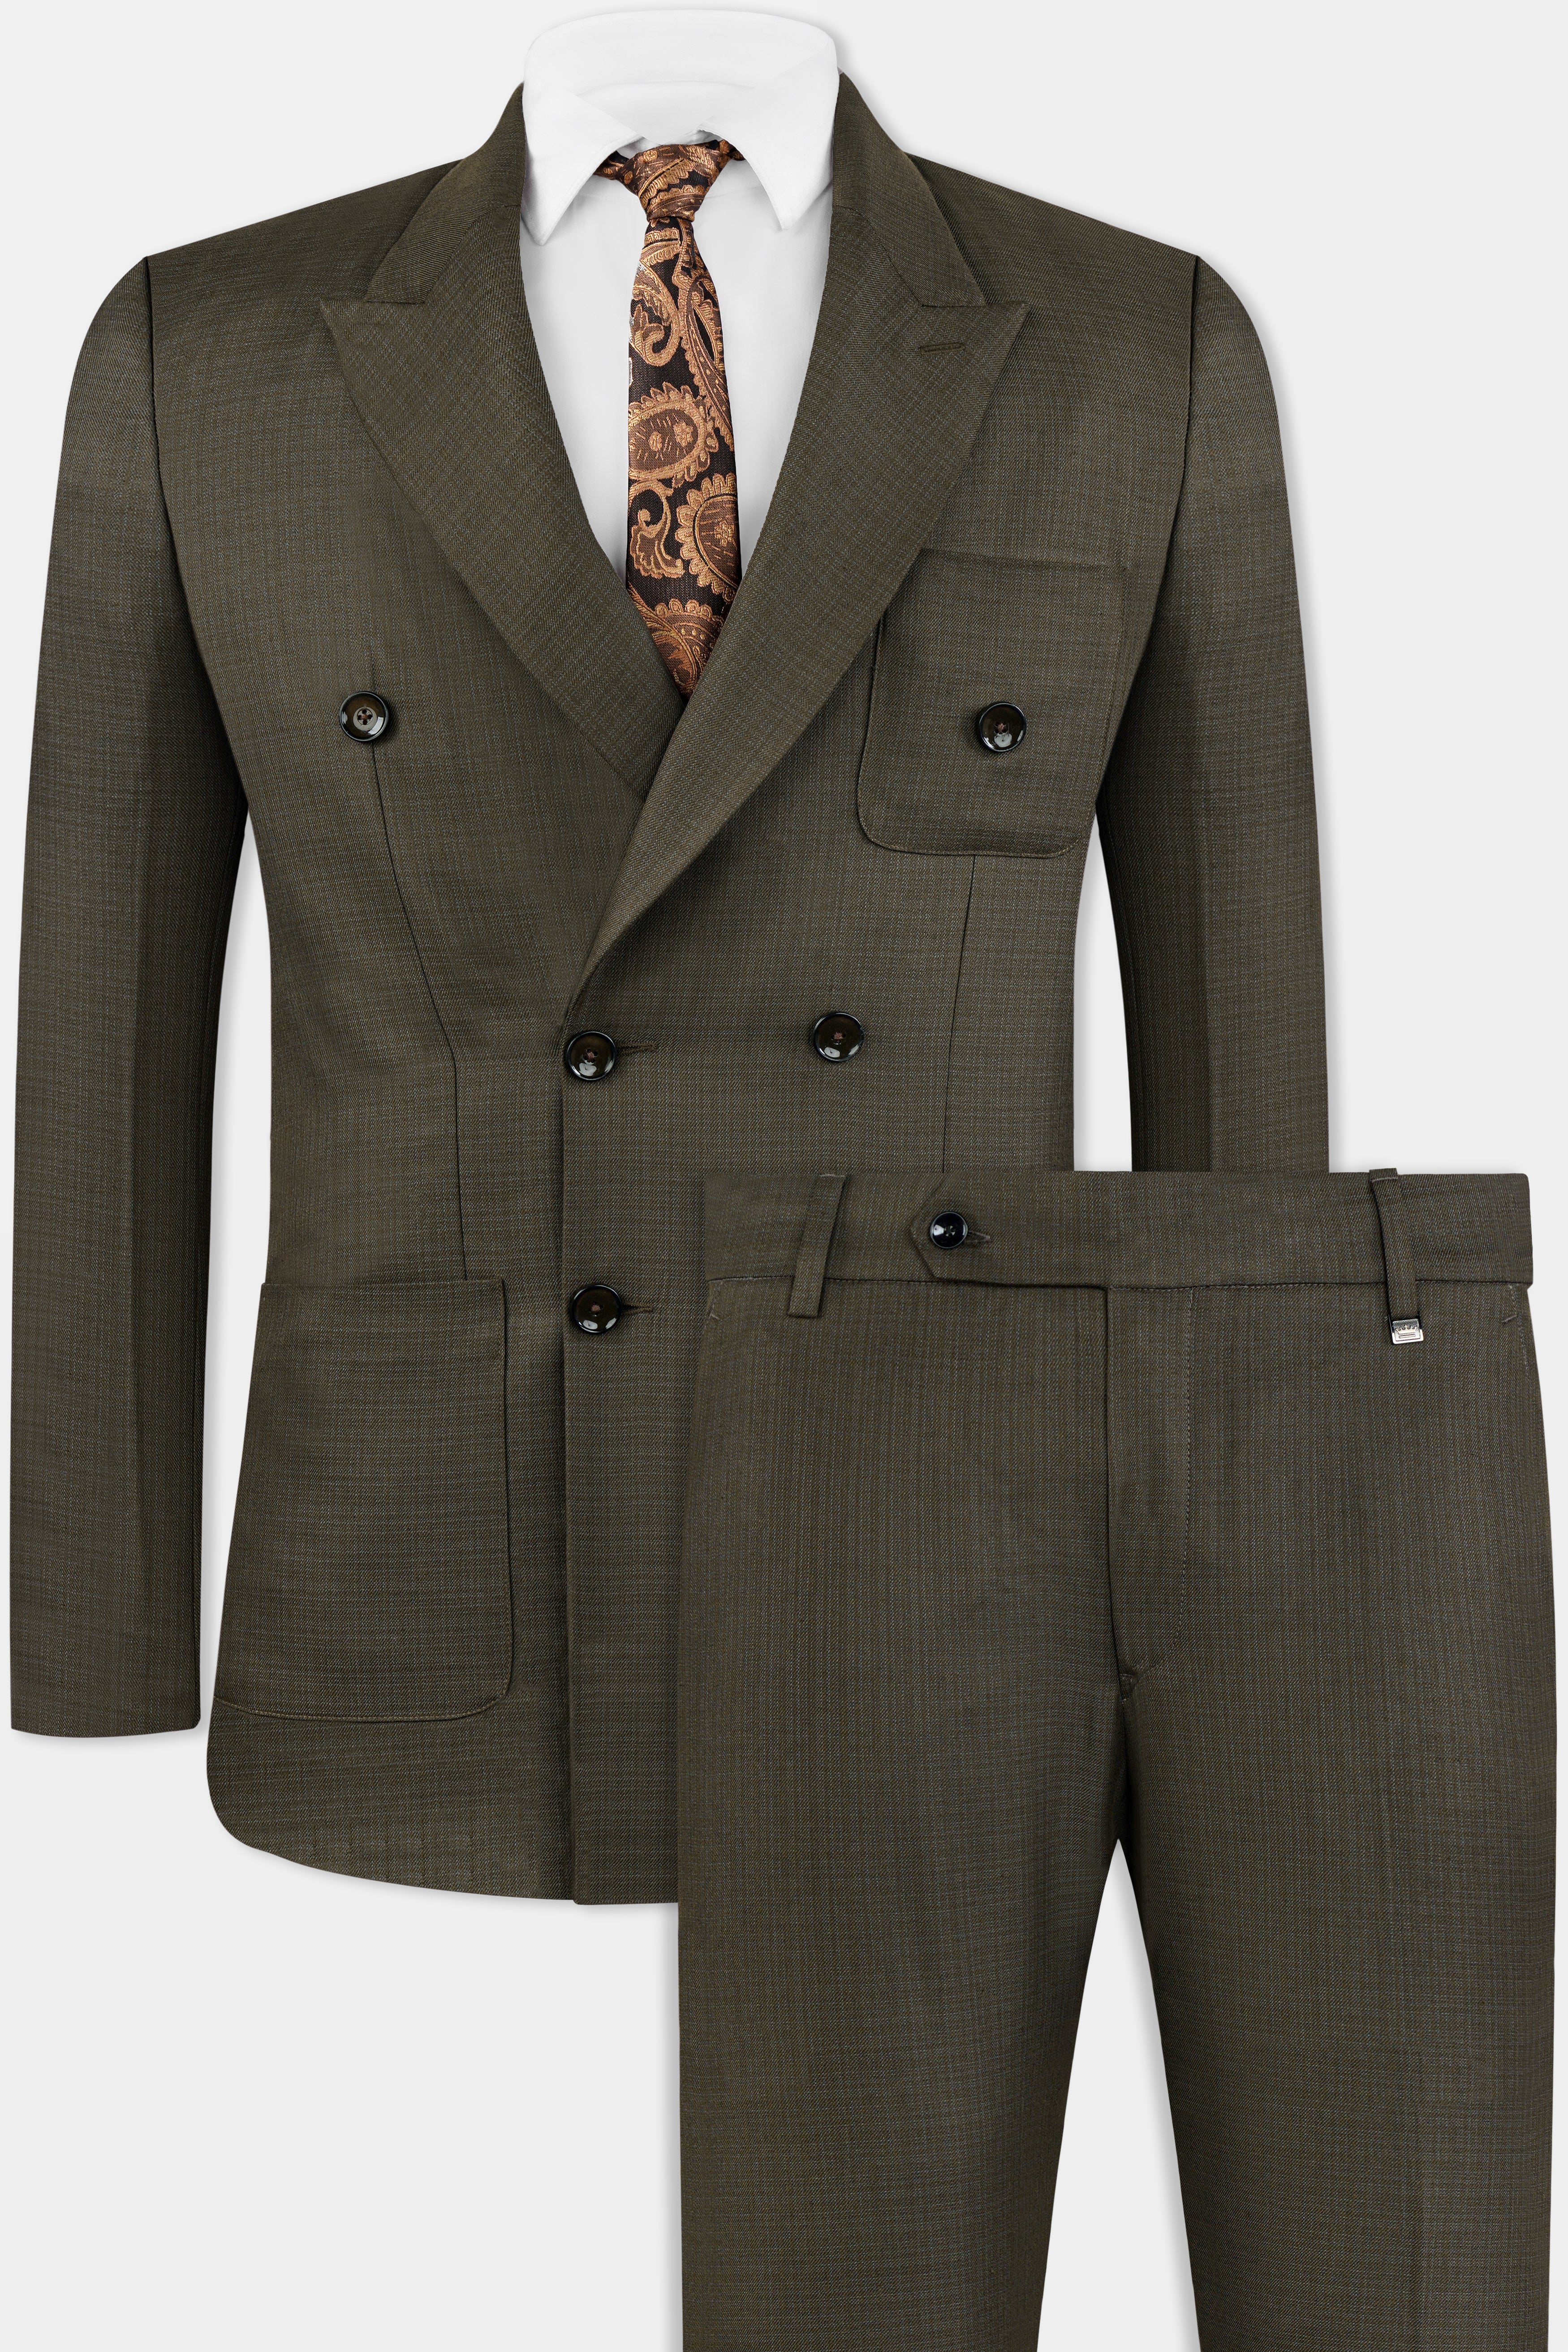 Eclipse Brown Wool Rich Double Breasted Sports Suit ST3133-DB-PP-36, ST3133-DB-PP-38, ST3133-DB-PP-40, ST3133-DB-PP-42, ST3133-DB-PP-44, ST3133-DB-PP-46, ST3133-DB-PP-48, ST3133-DB-PP-50, ST3133-DB-PP-52, ST3133-DB-PP-54, ST3133-DB-PP-56, ST3133-DB-PP-58, ST3133-DB-PP-60